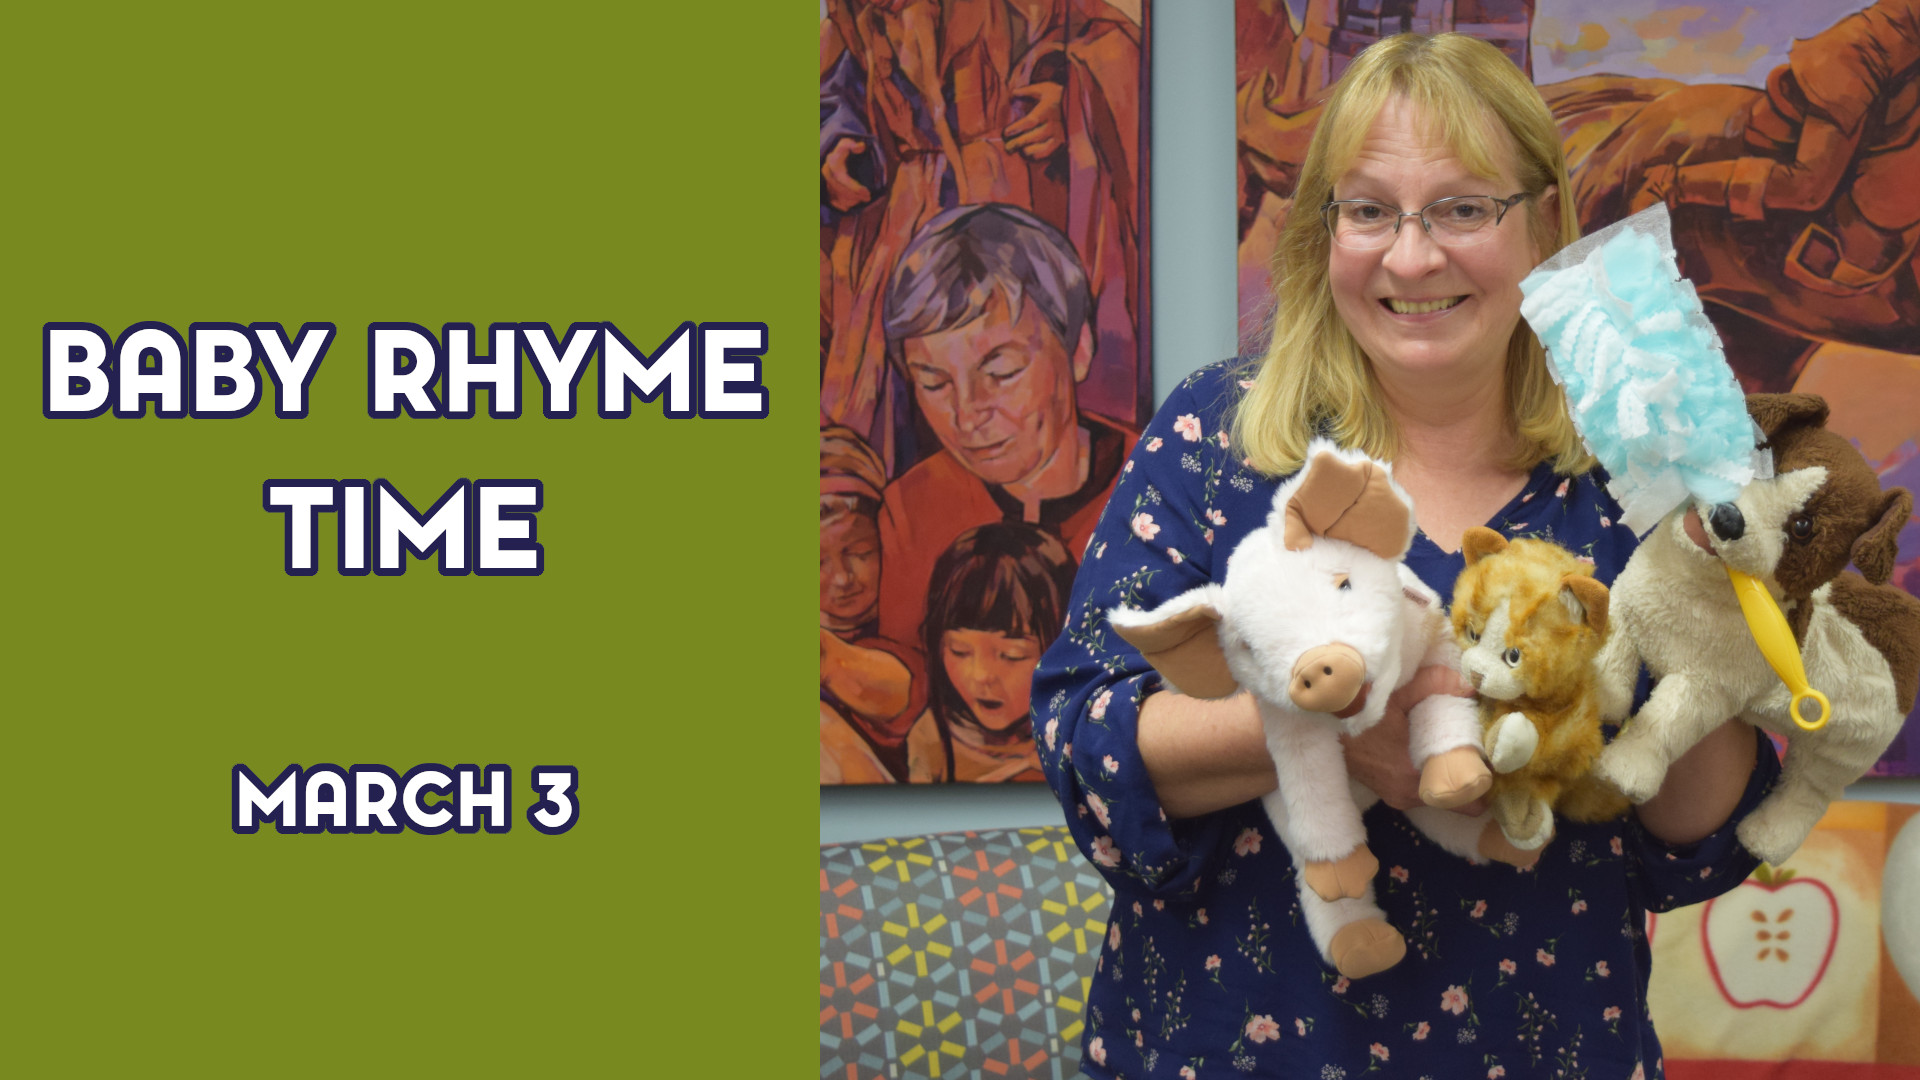 A woman holds stuffed animals next to the text "Baby Rhyme Time March 3"